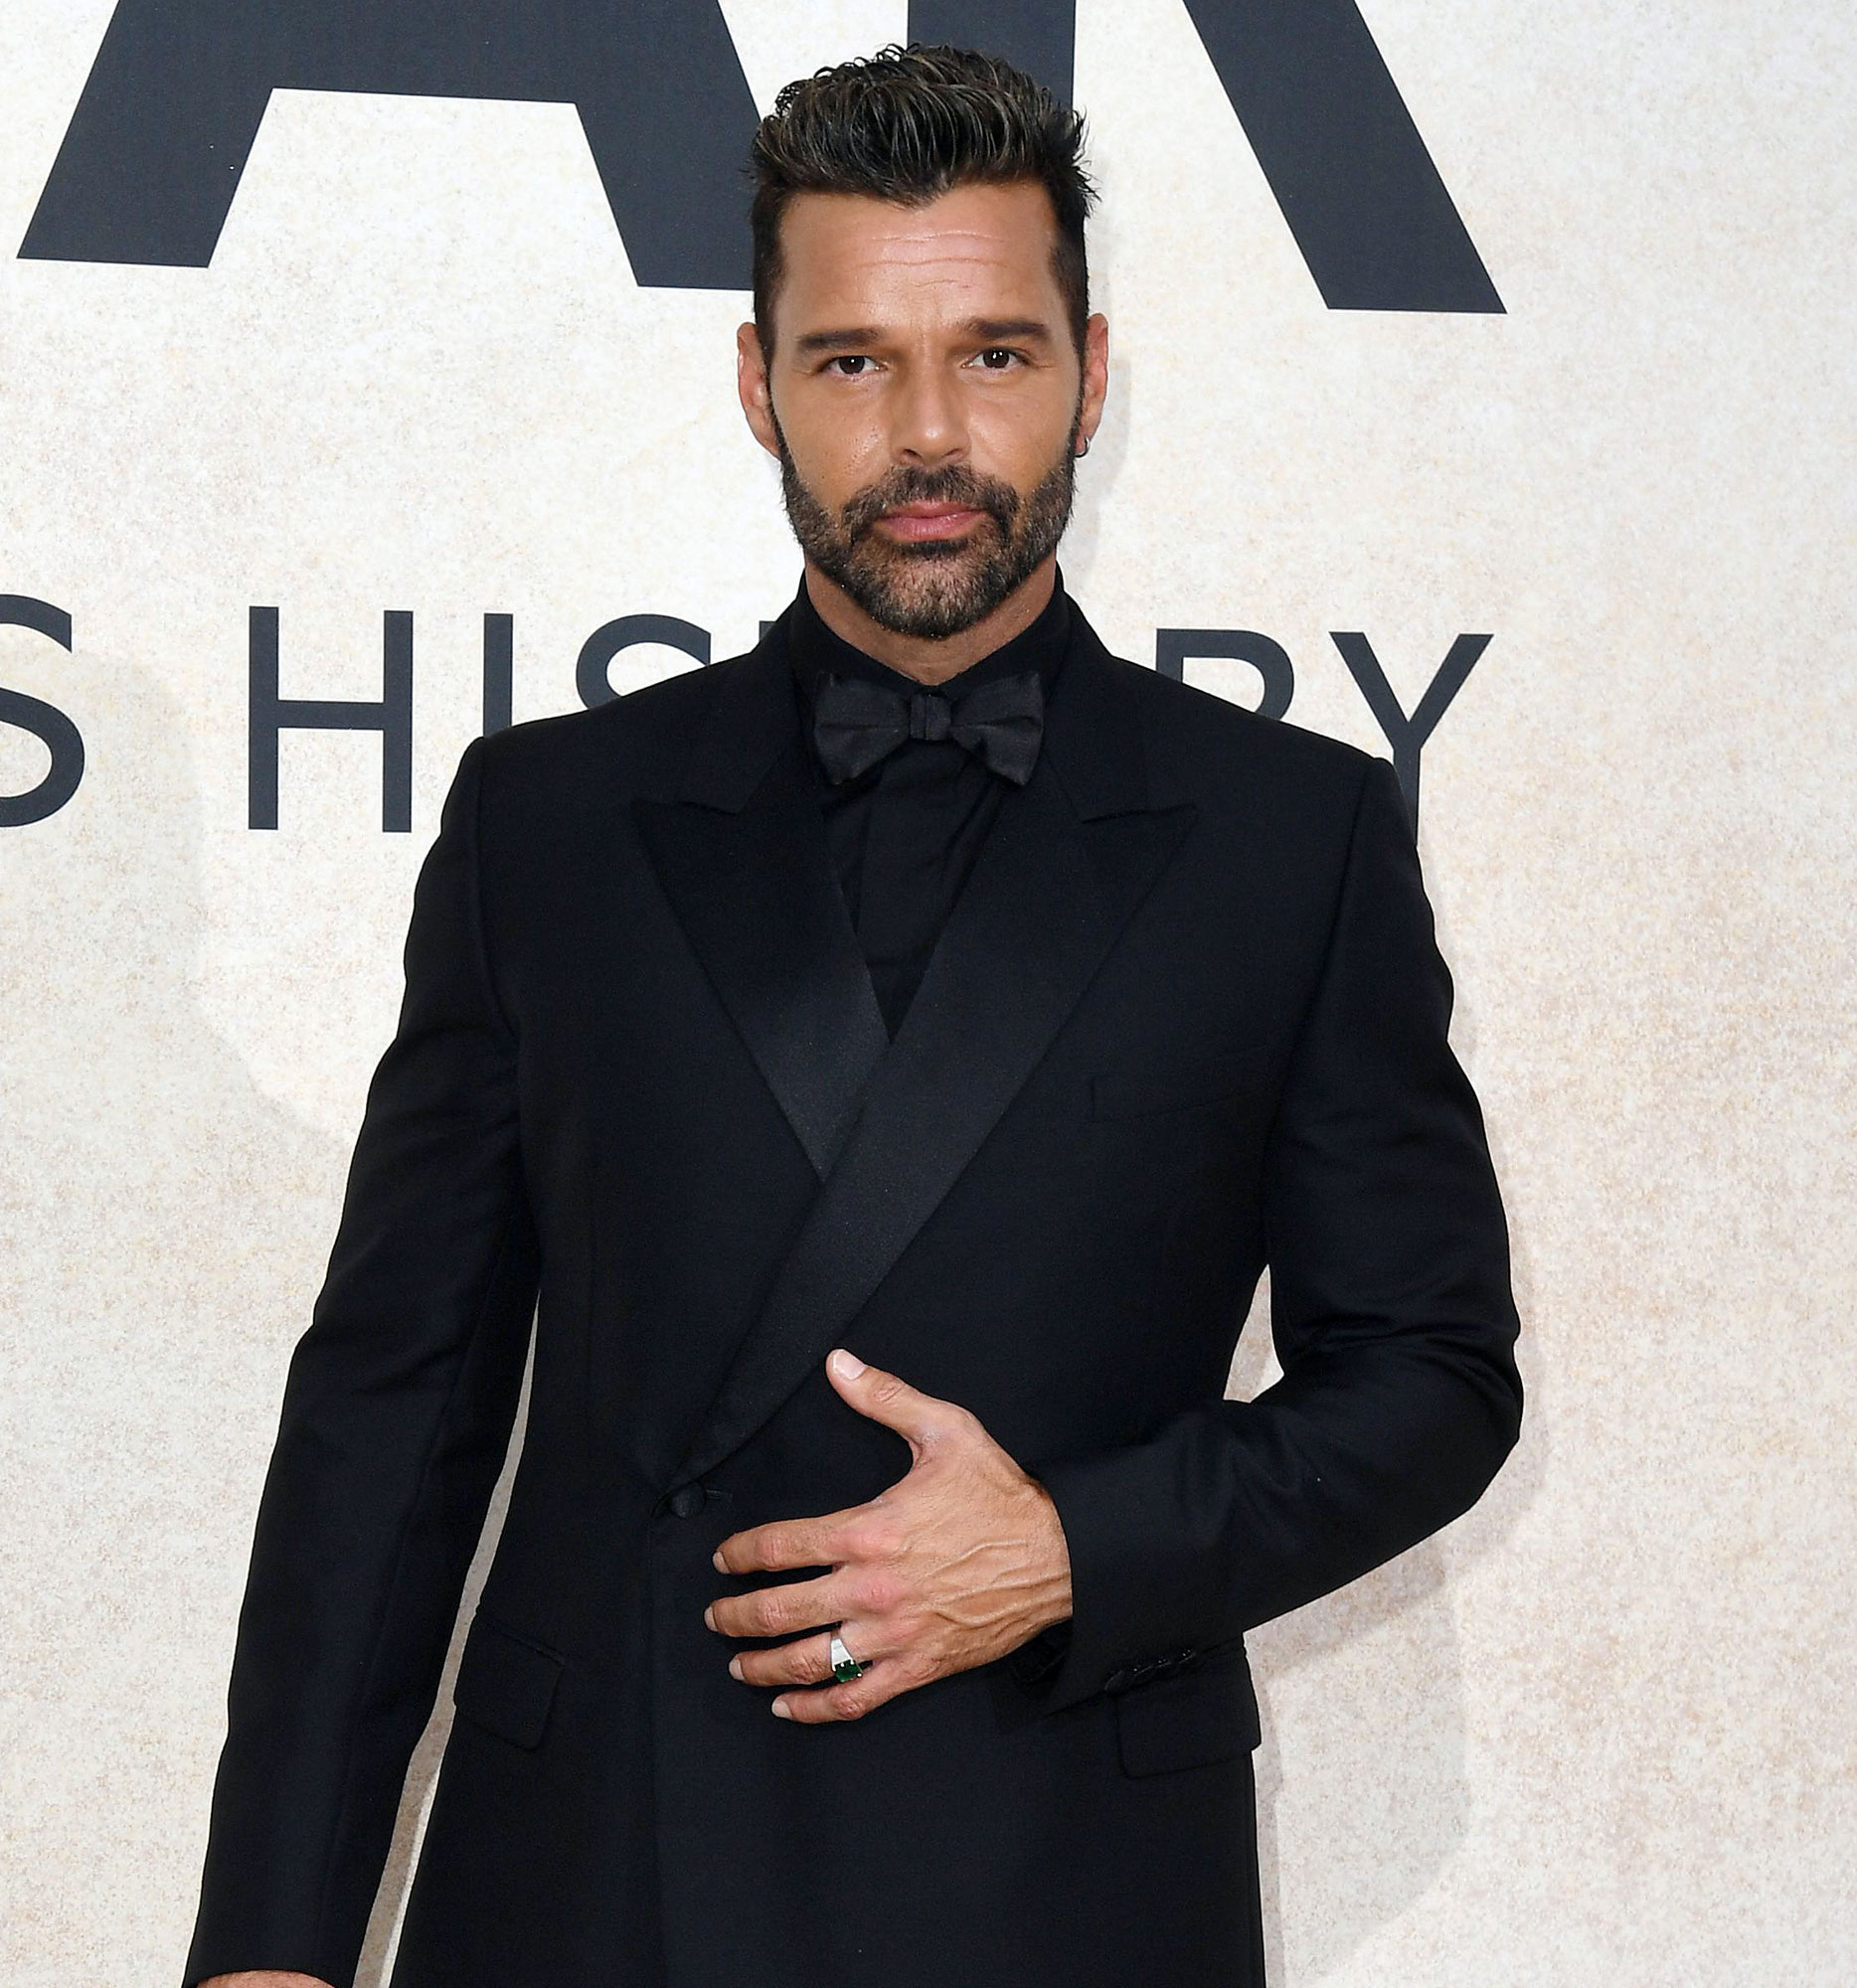 Ricky Martin Denies Alleged Sexual Relationship With Nephew image